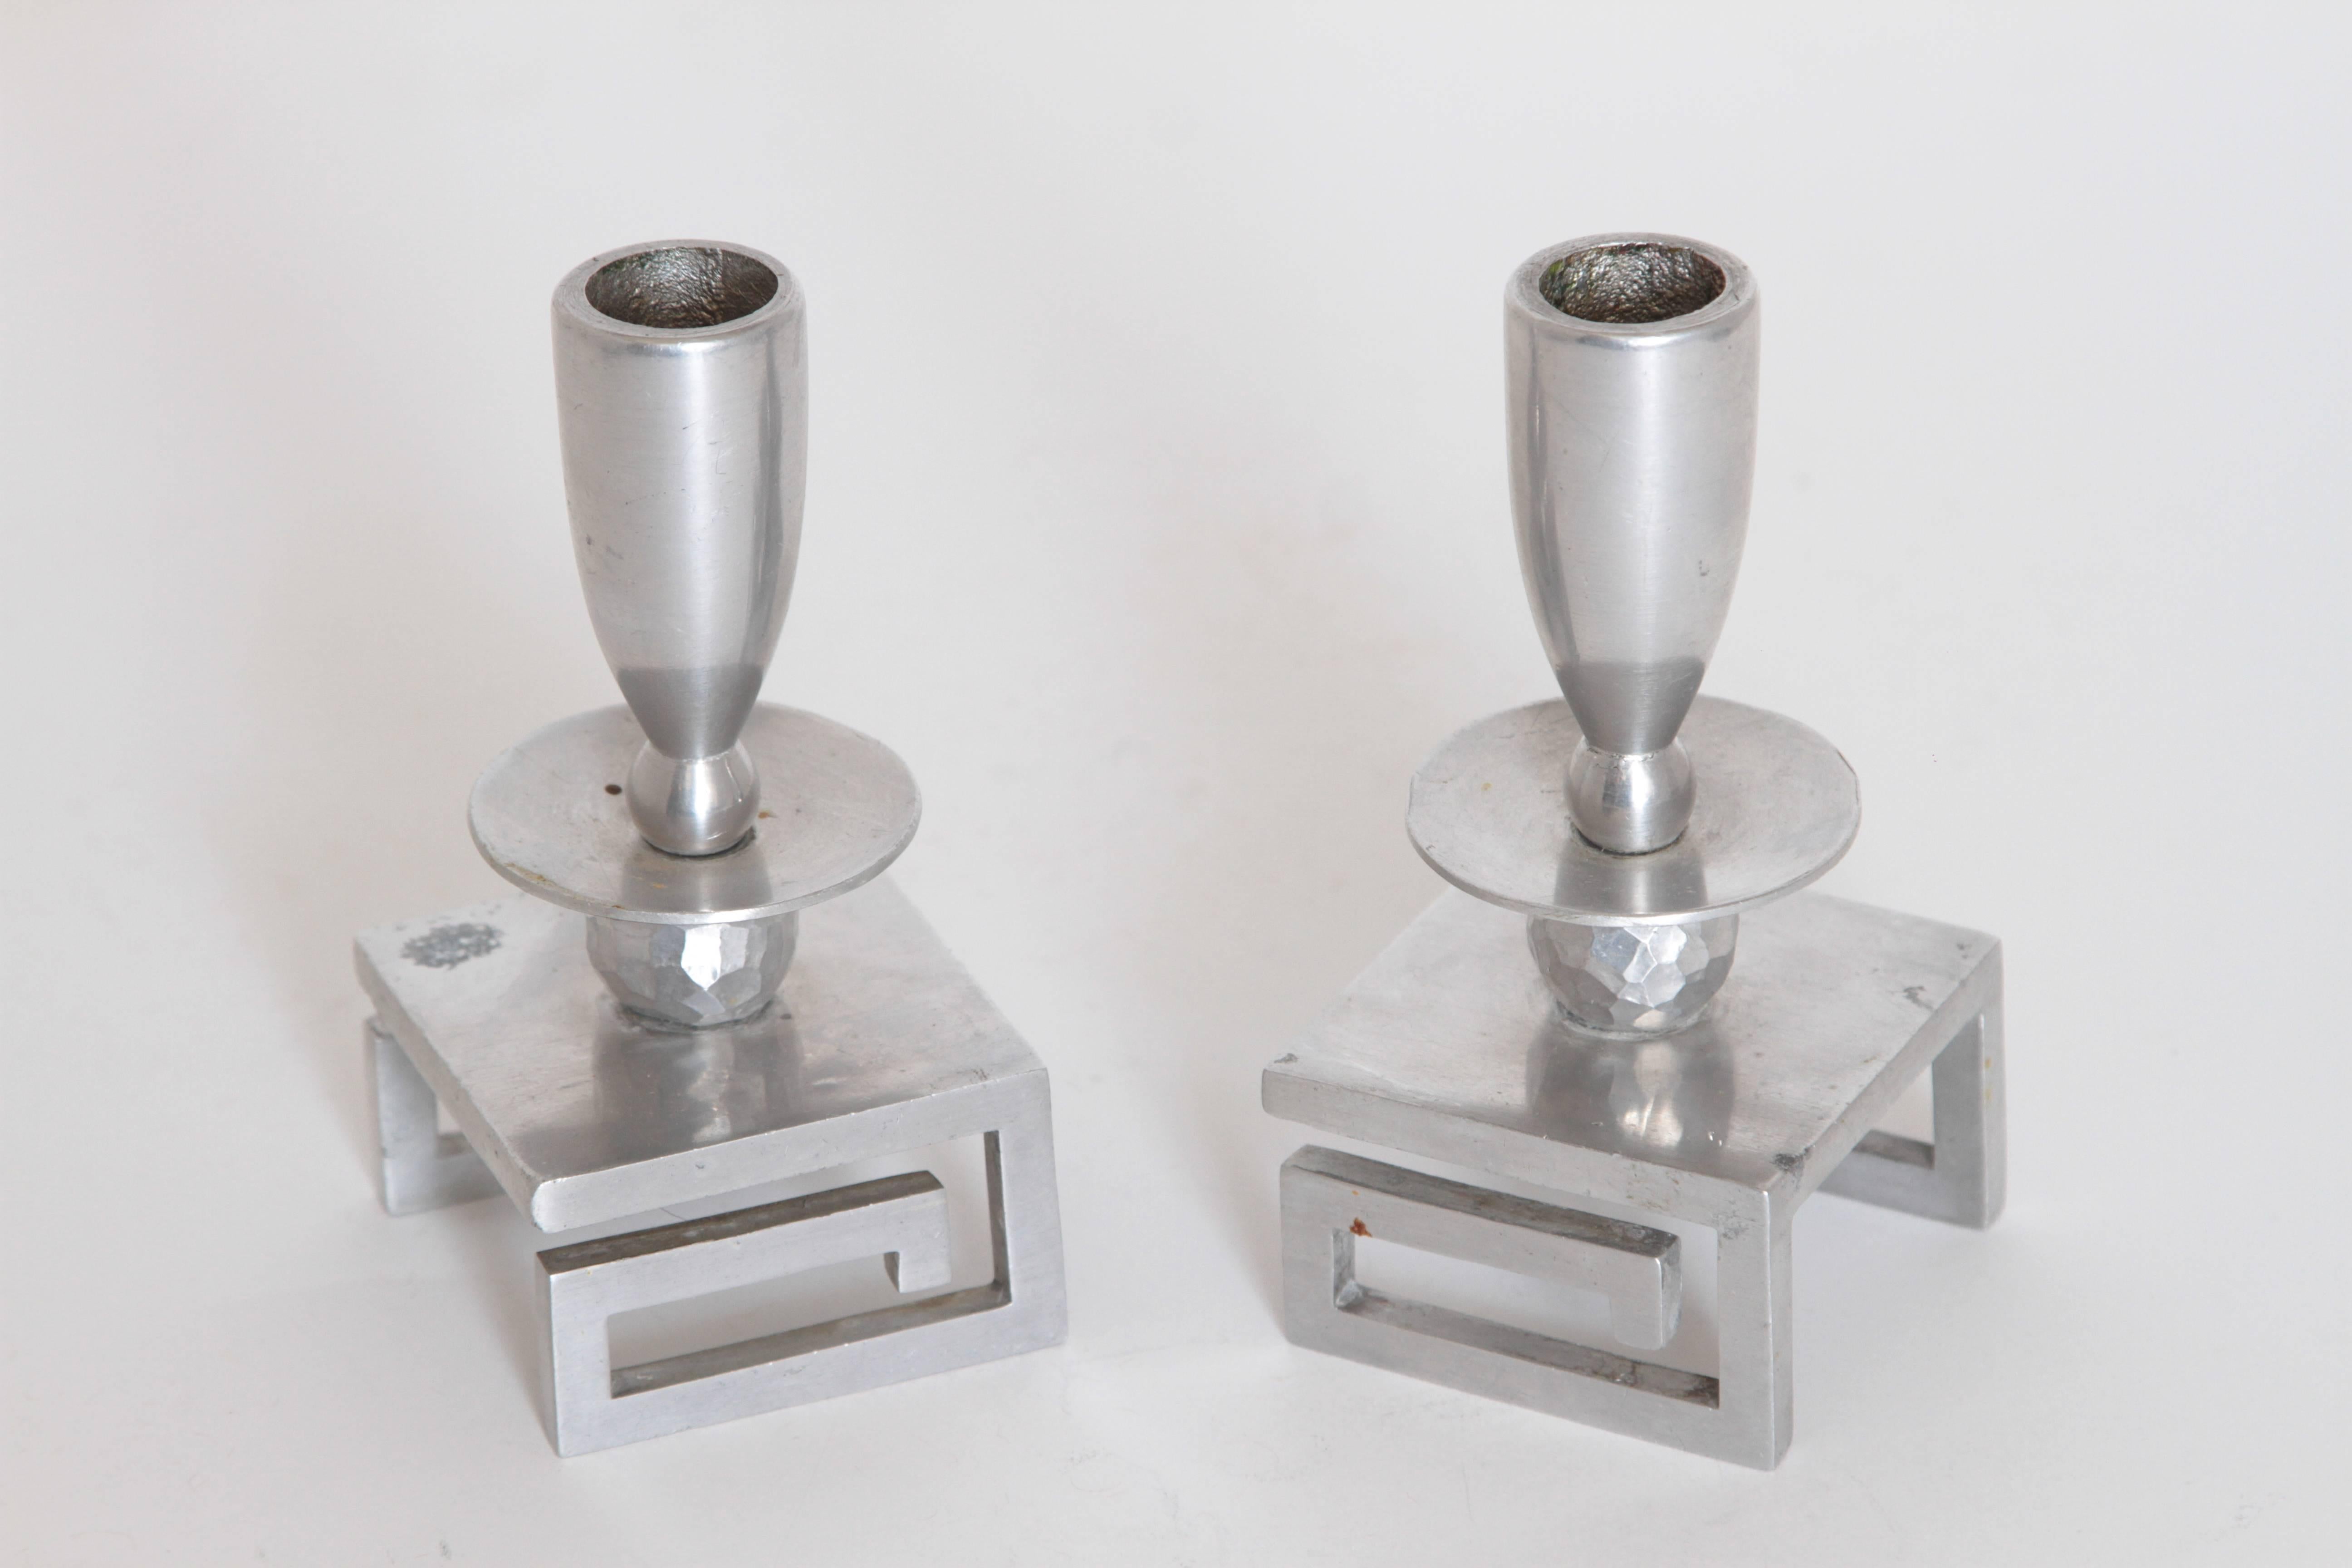 Machine Age Hand-Wrought Aluminium Palmer Smith Candlestick Holders, Two Pairs In Good Condition For Sale In Dallas, TX